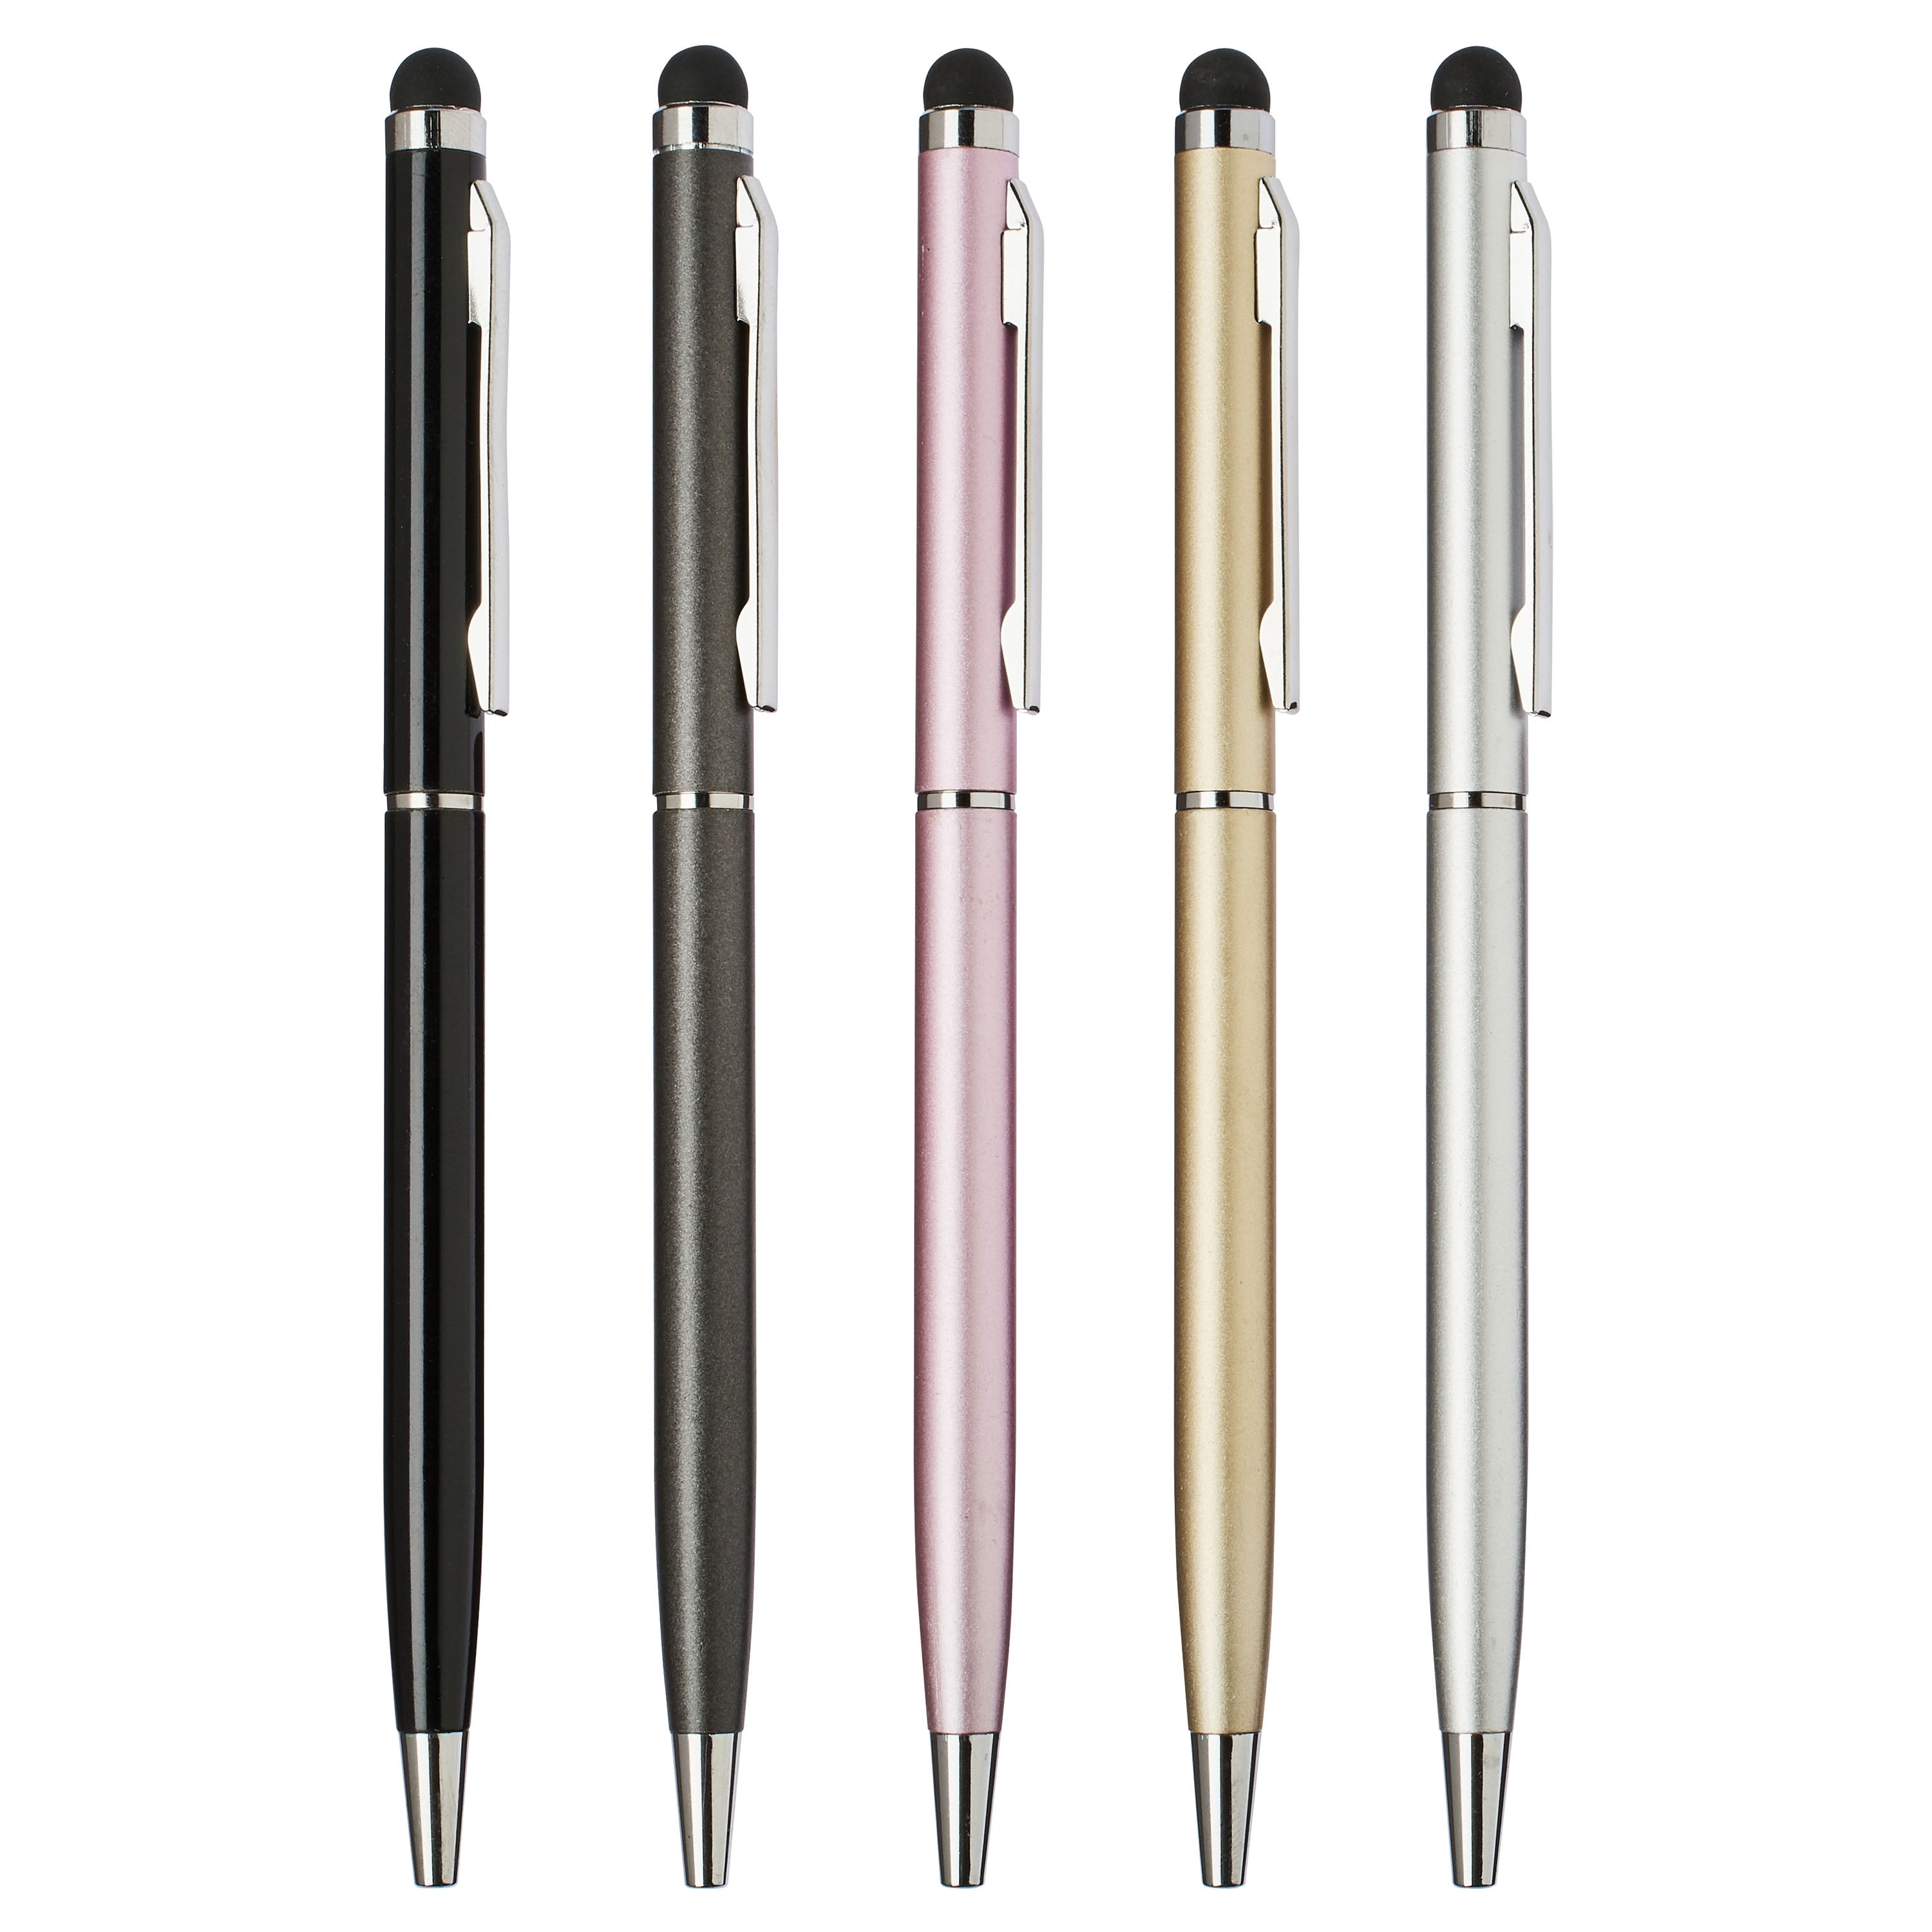 5 Pack of 4" Length Rubber Tip Stylus Pens for  iPhone iPad Tablet Android 